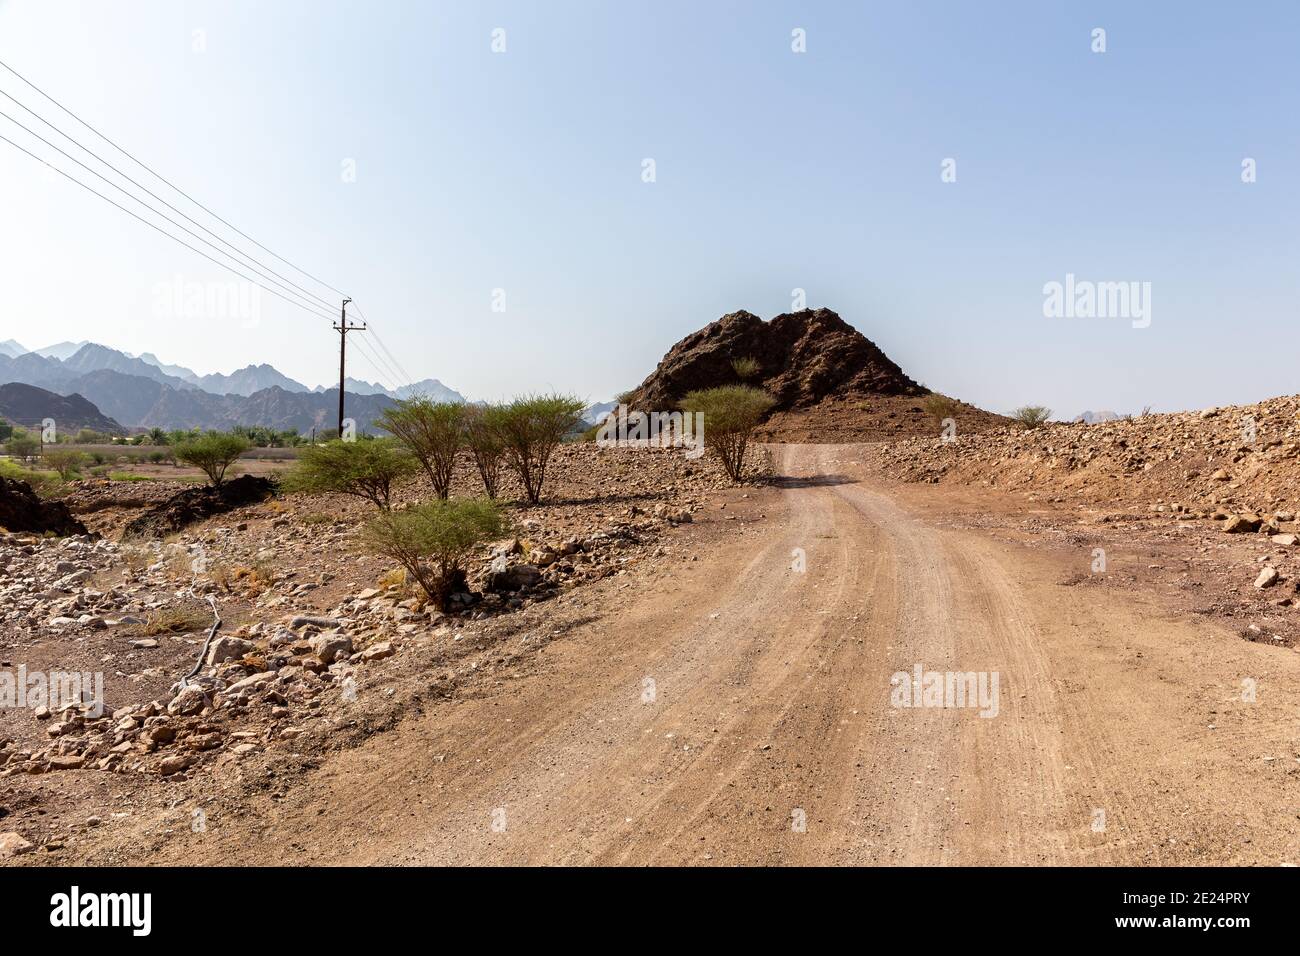 Rural gravel road in Hatta village in Hajar Mountains in United Arab Emirates with barren land and dry acacia trees. Stock Photo